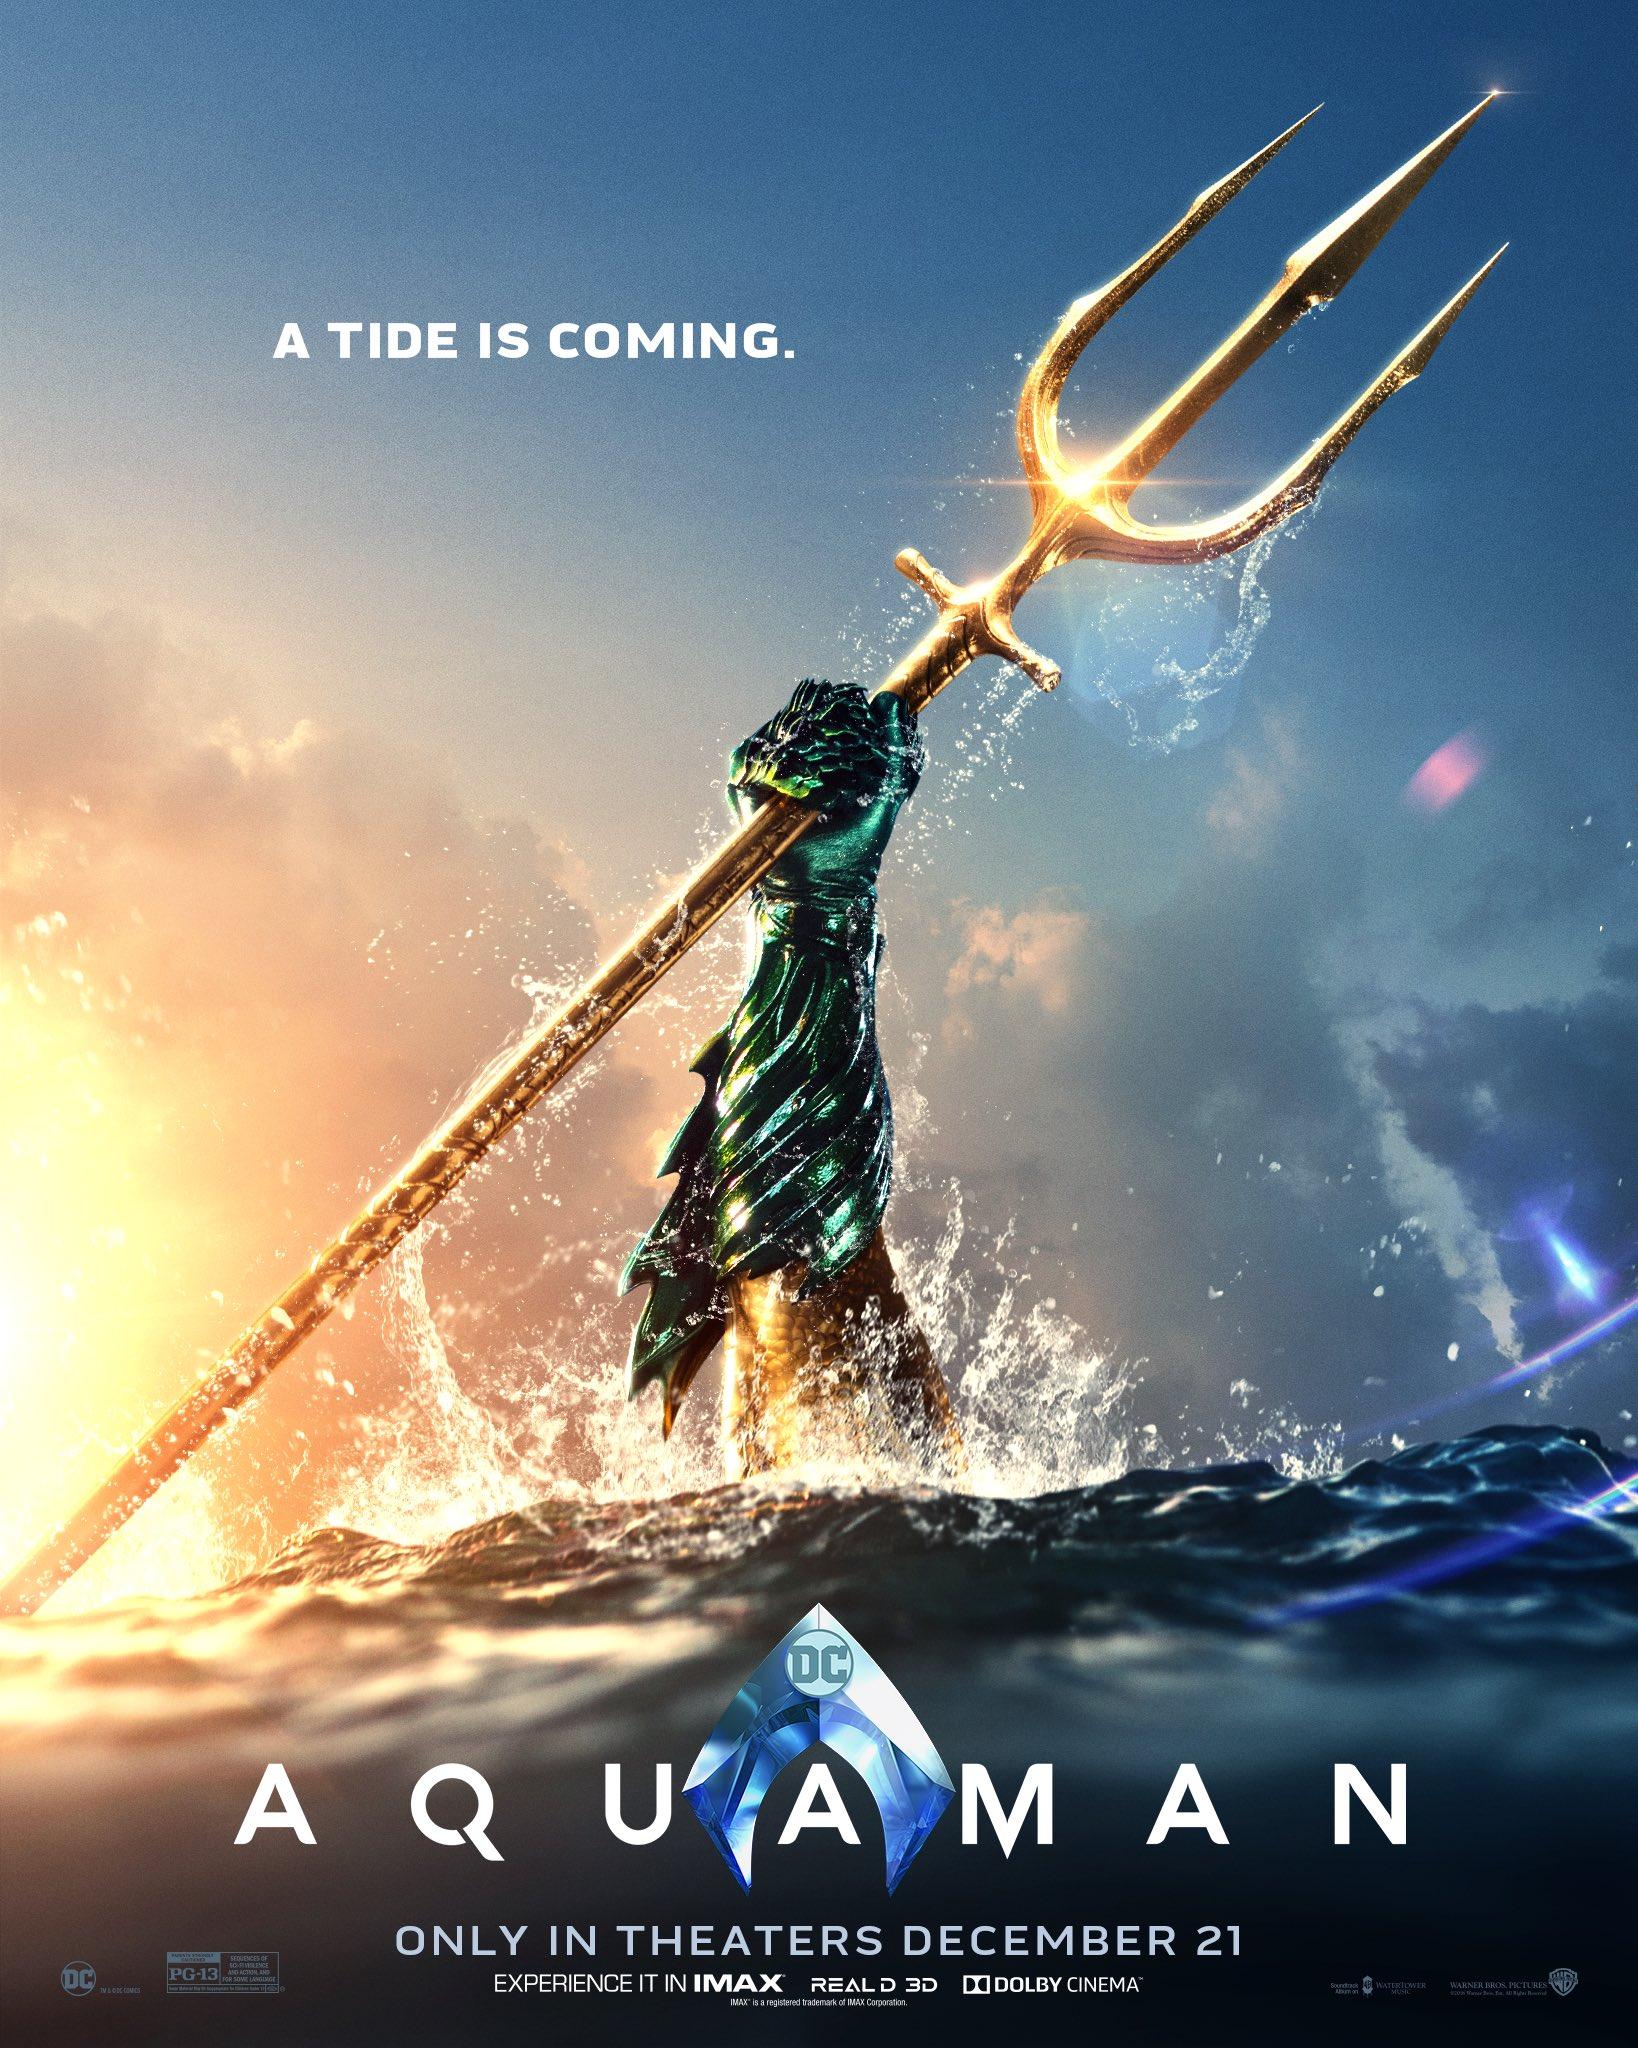 New Aquaman Poster Shows Peek at Classic Costume and Teases News to